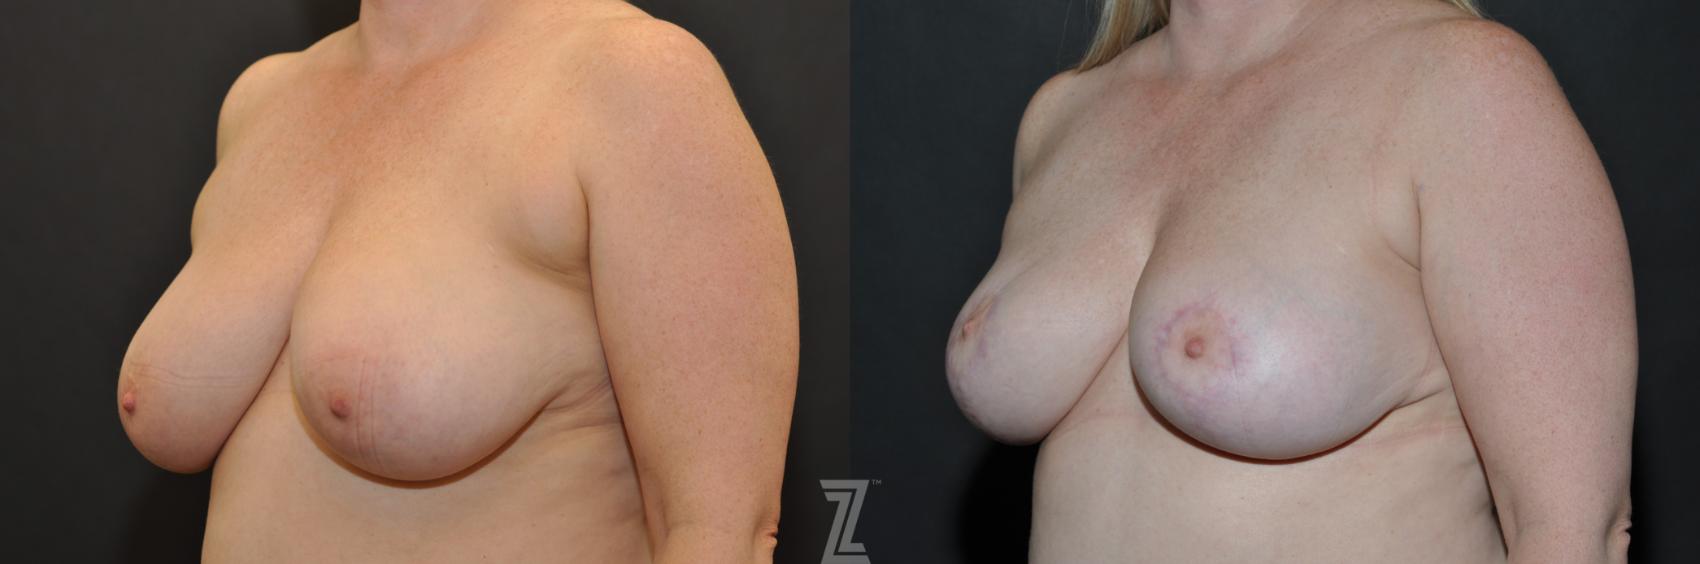 Breast Lift Before & After Photo | Austin, TX | The Piazza Center for Plastic Surgery & Advanced Skin Care